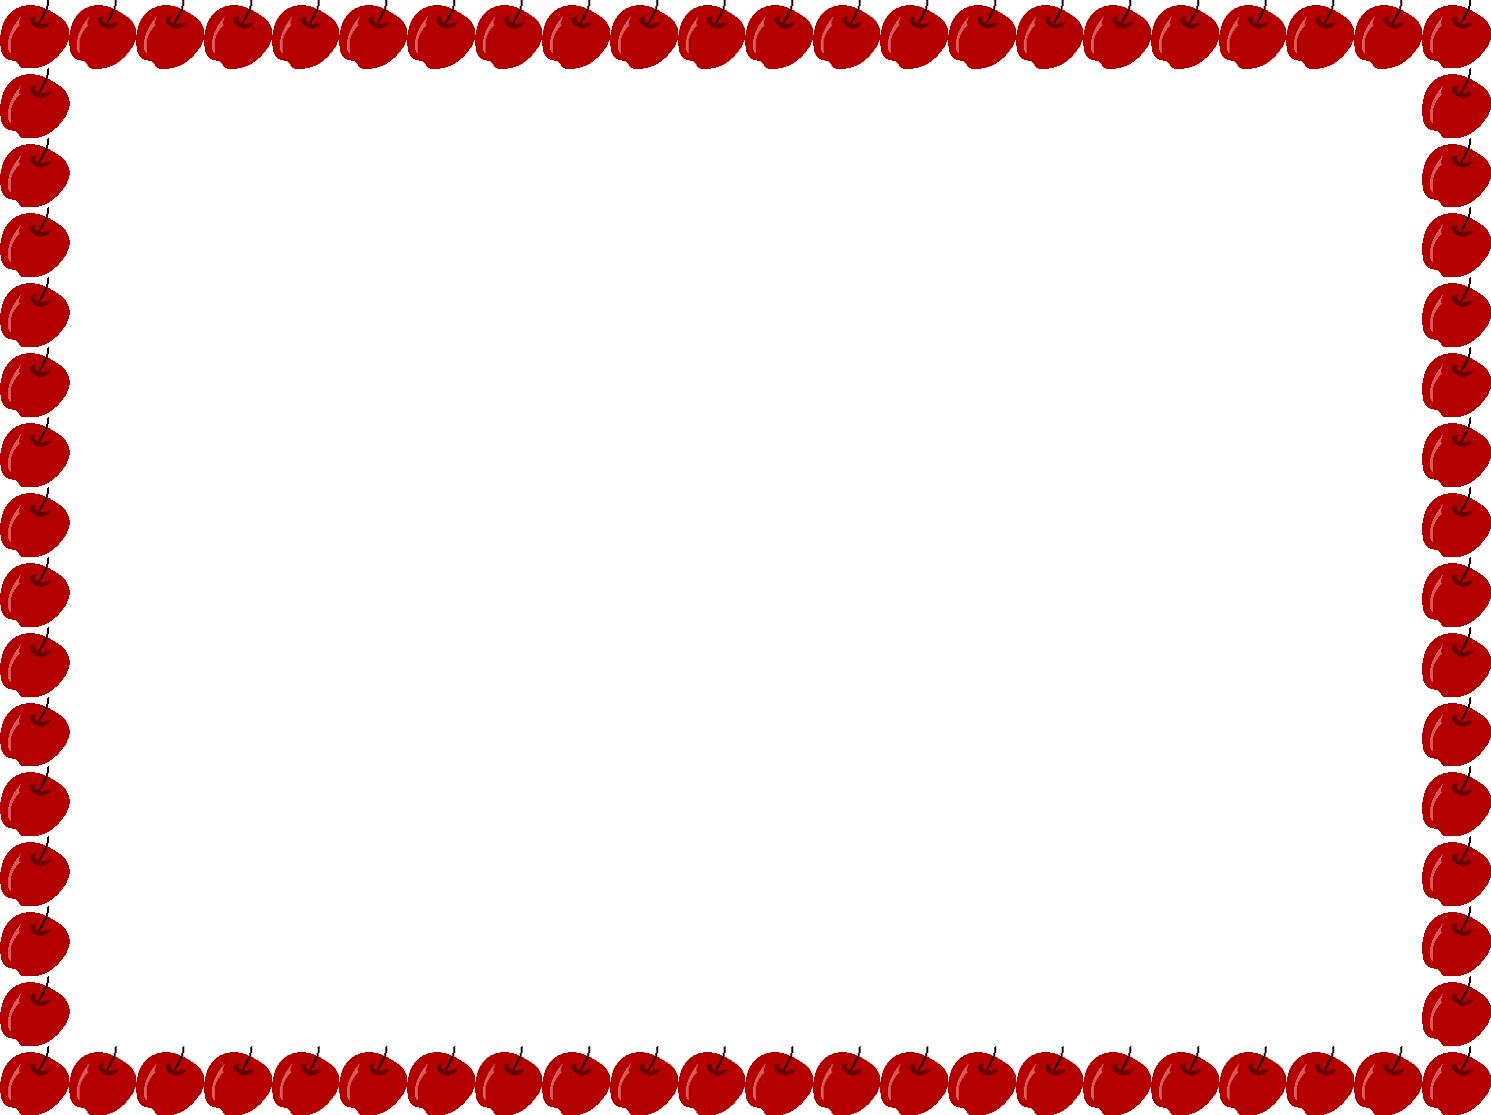 Illustrated Frame Border With